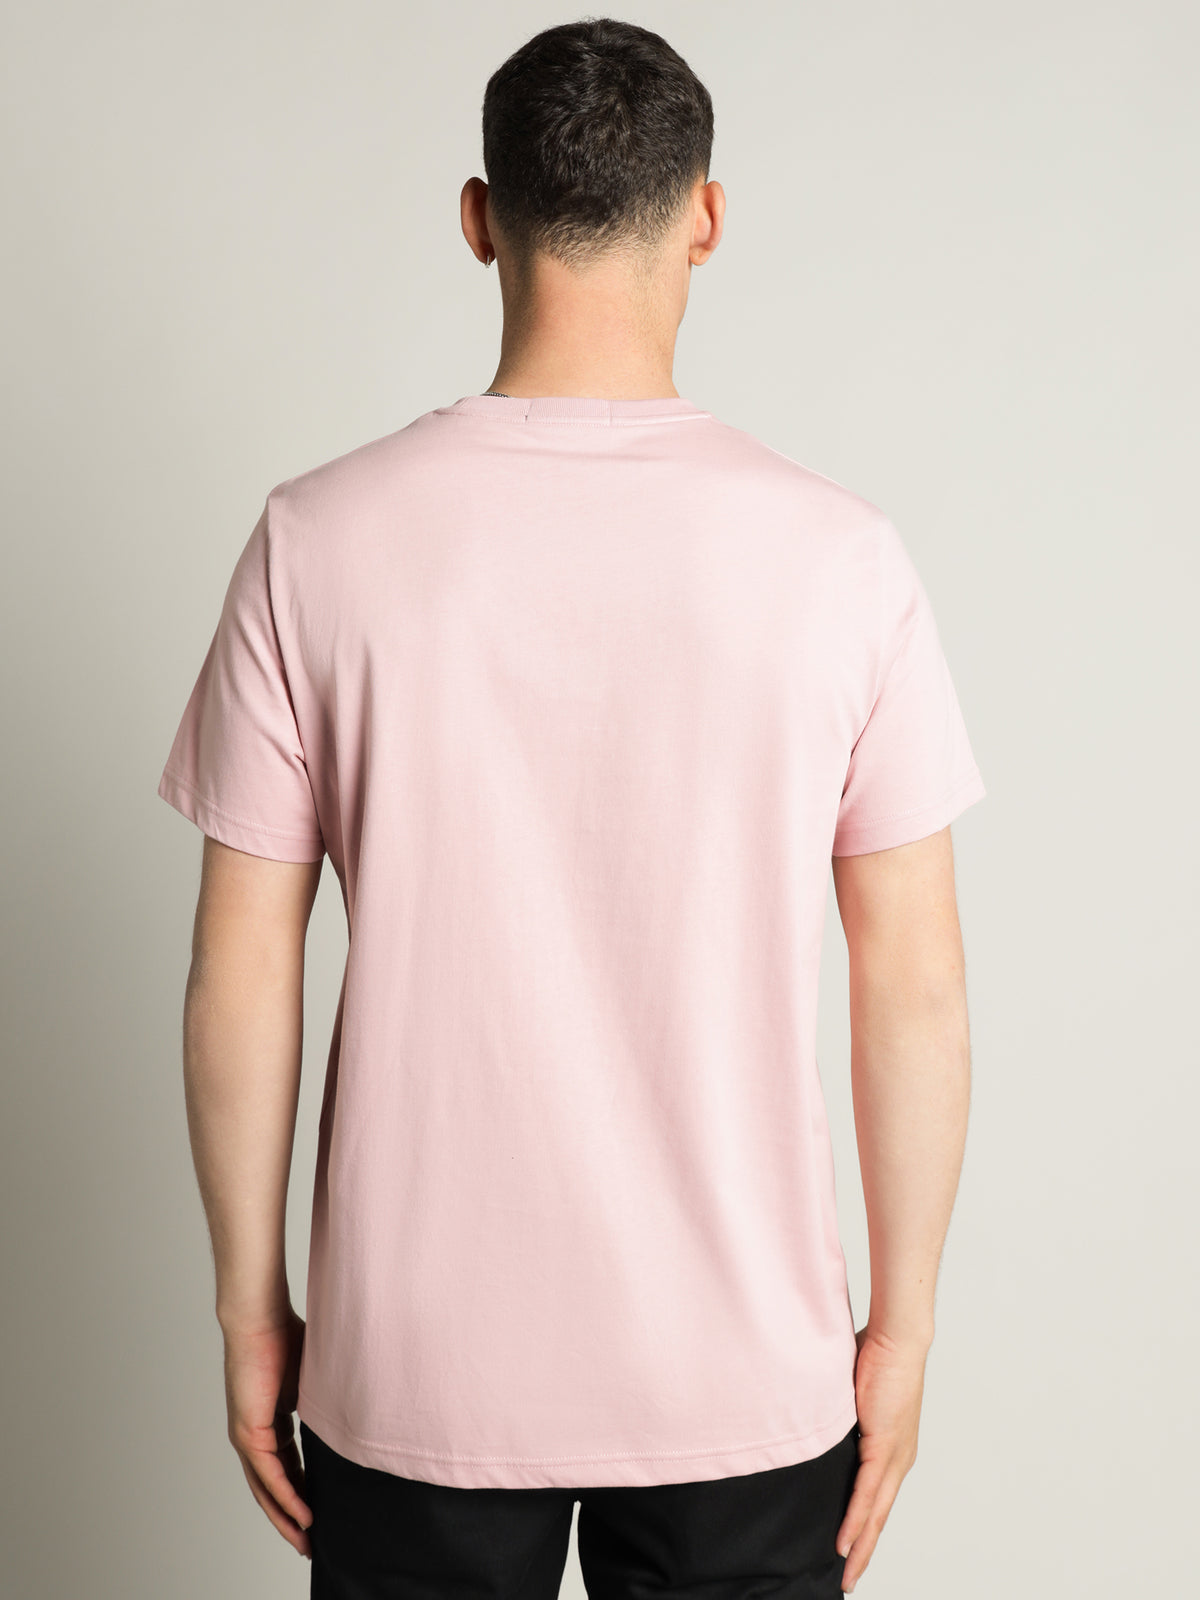 Print Registration T-Shirt in Chalky Pink